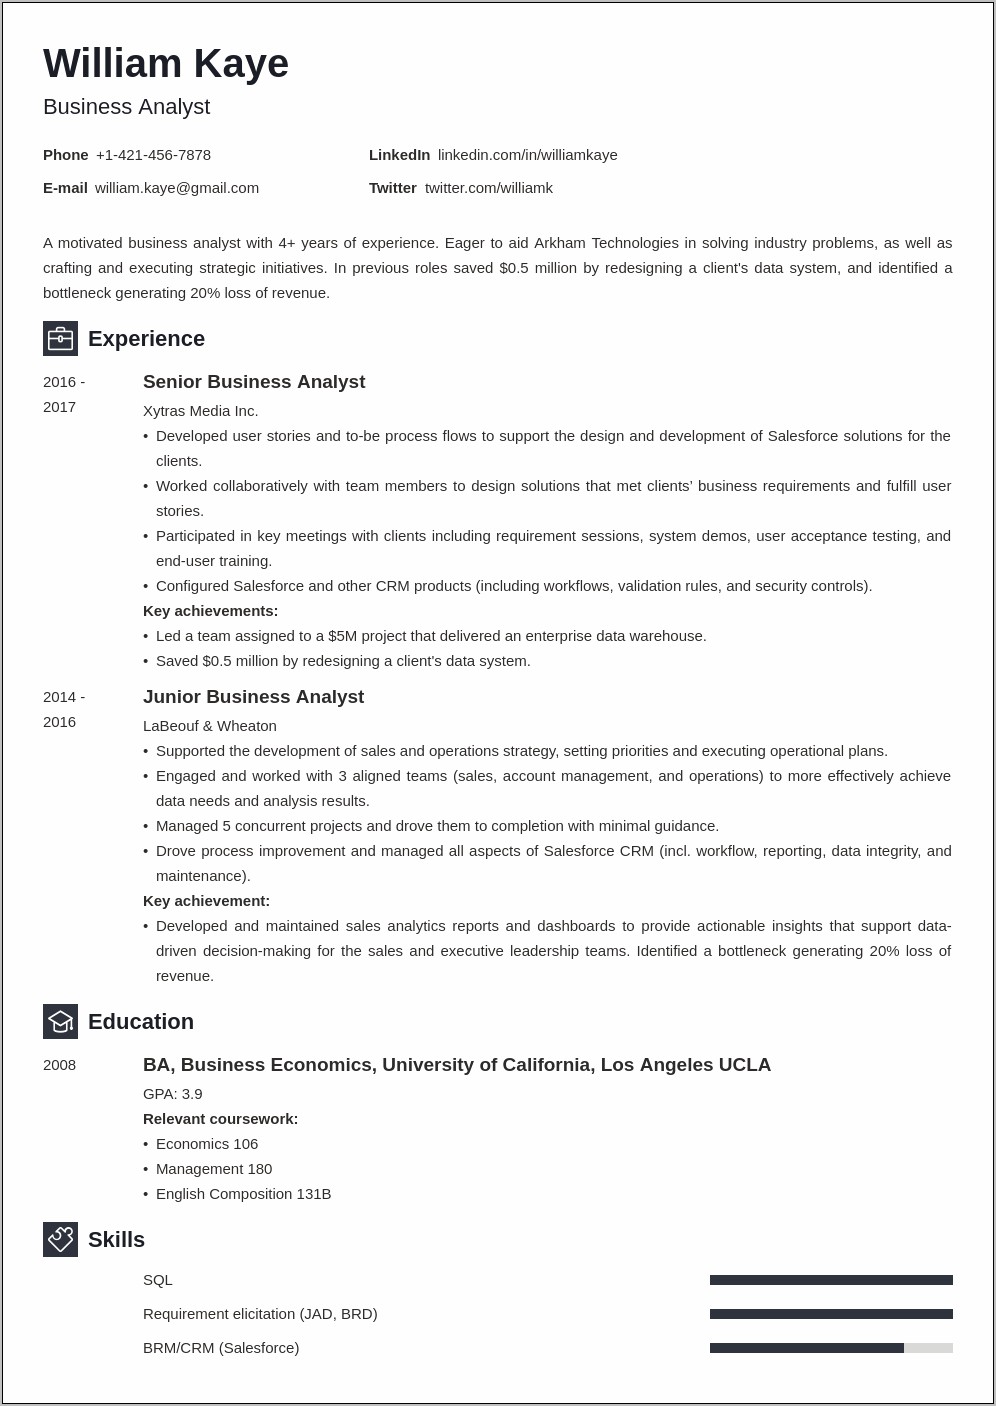 Business Analyst Resume With 5 Years Experience